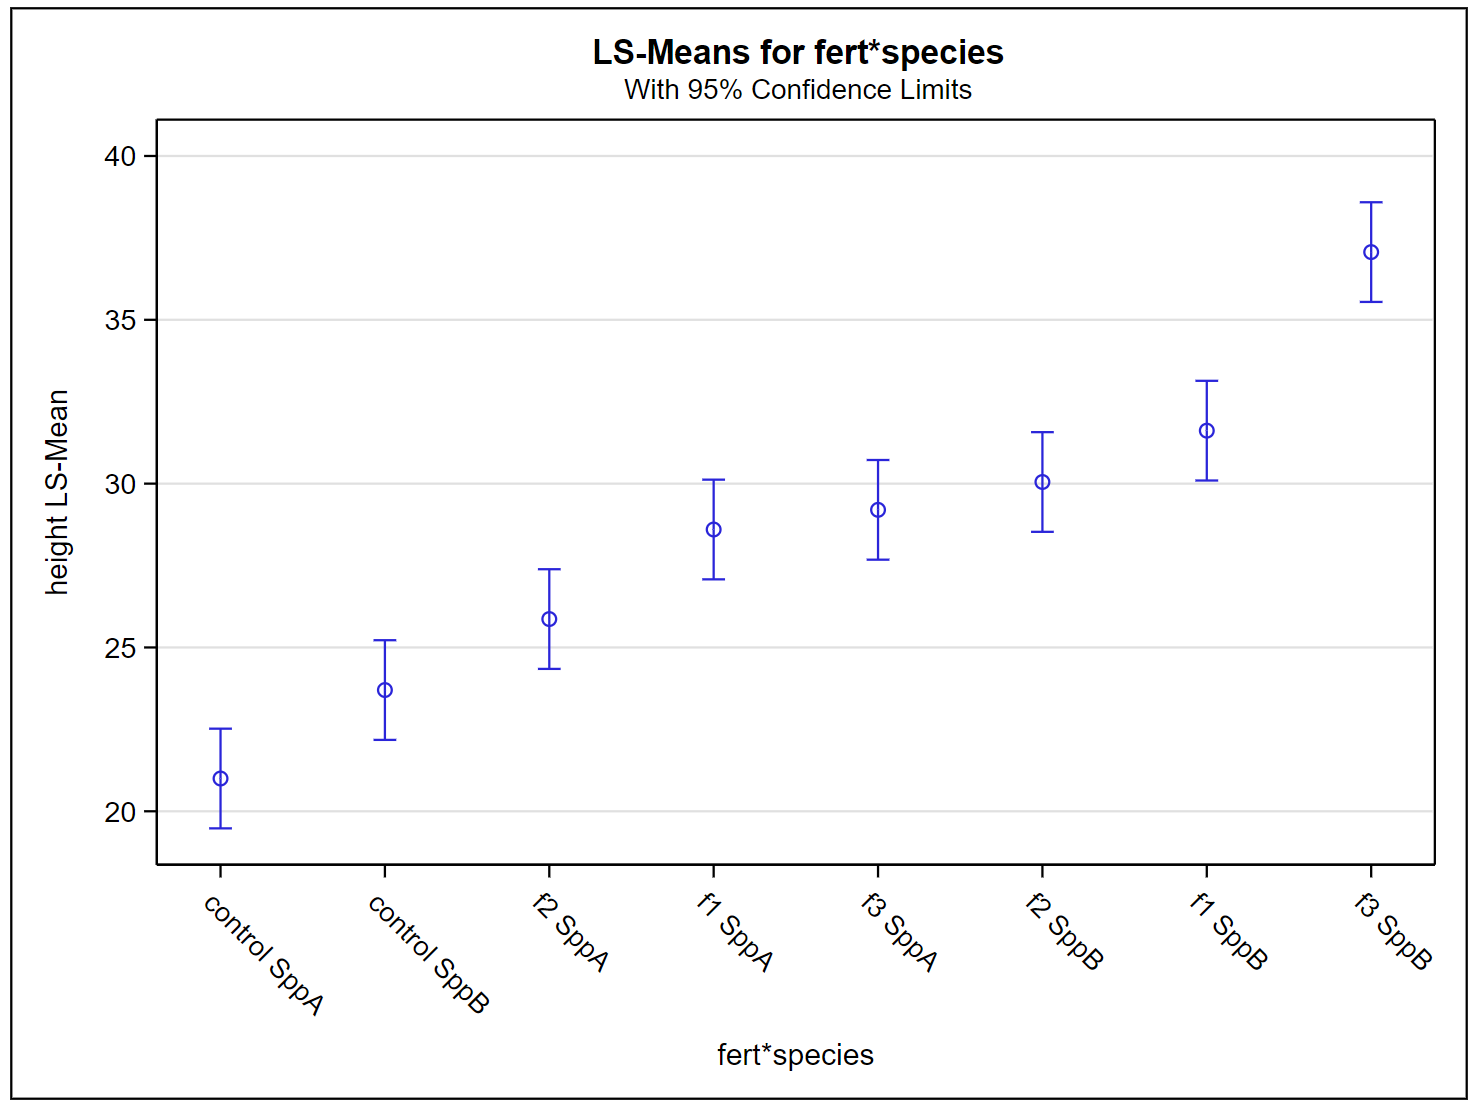 Plot of LS-means for fert*species, with 95% confidence limits.